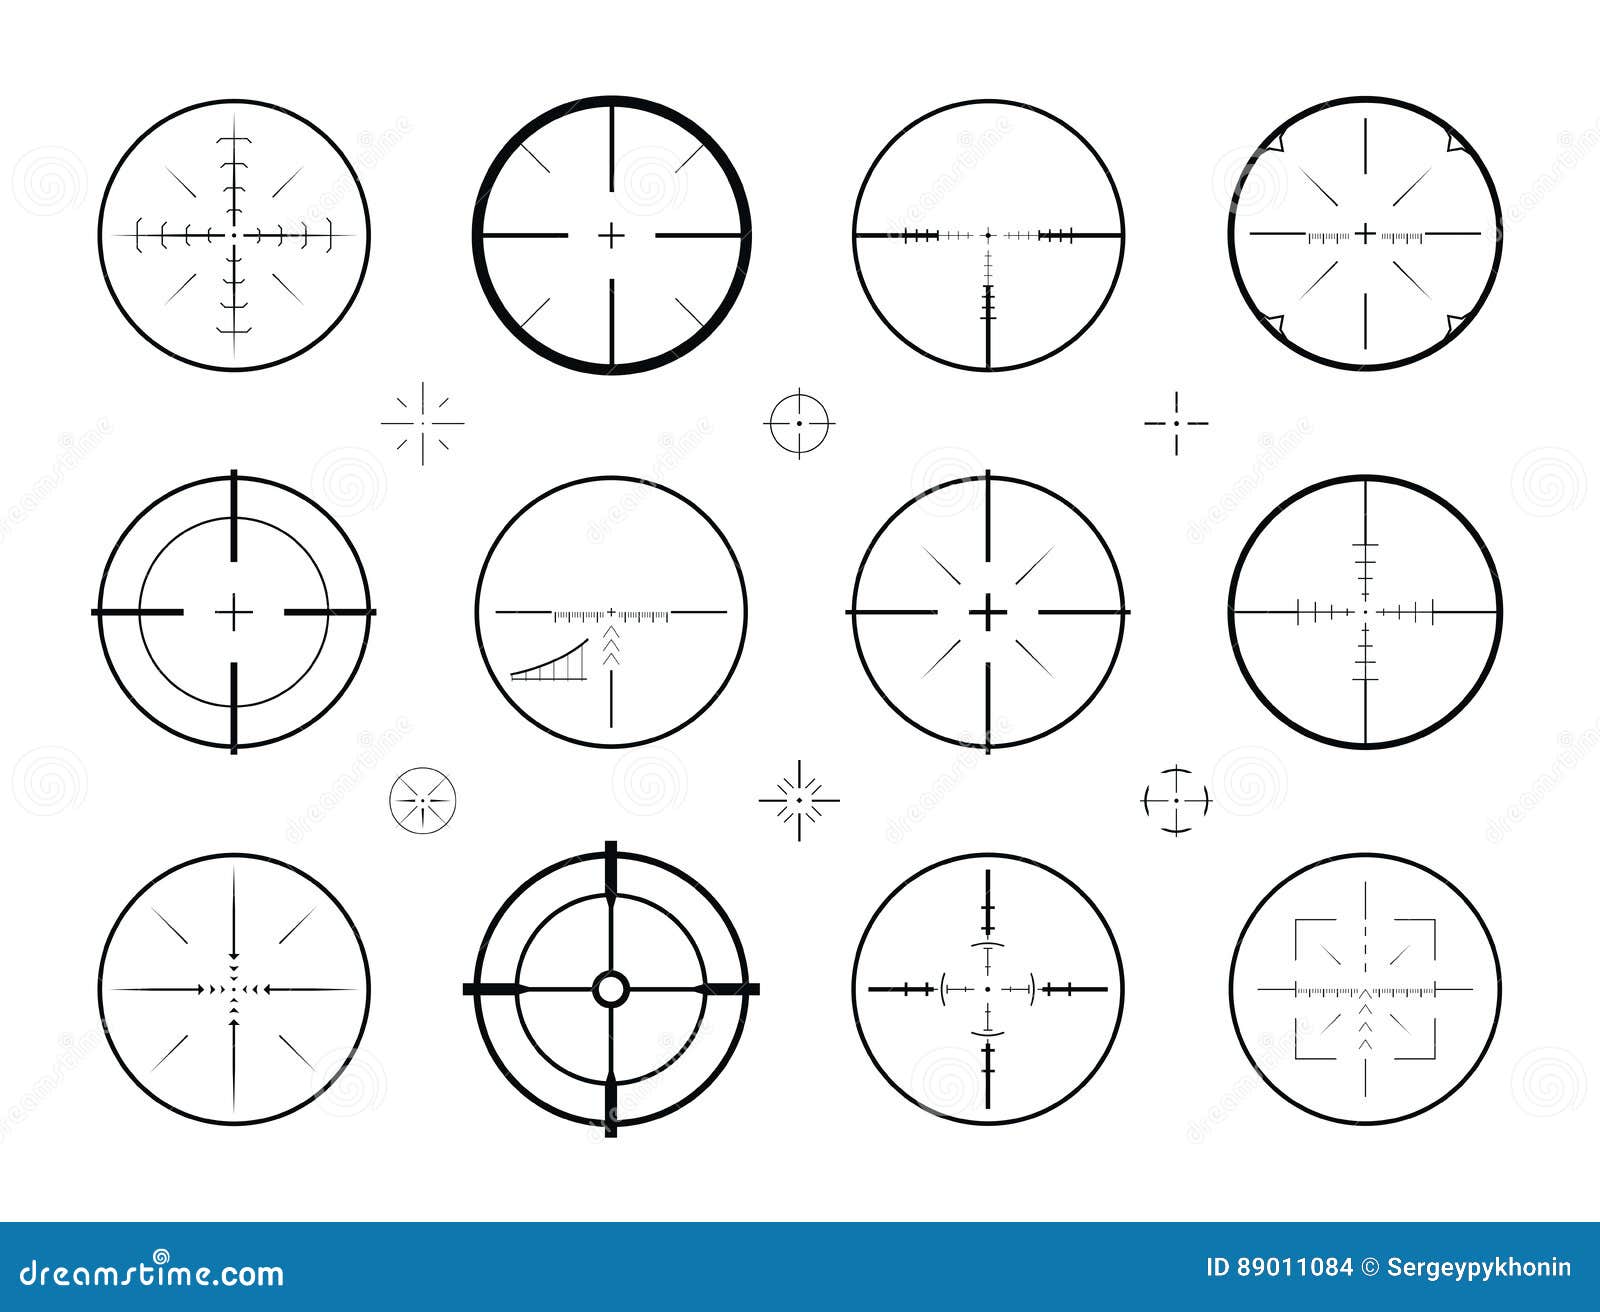 target, sight sniper set of icons. hunting, rifle scope, crosshair .  